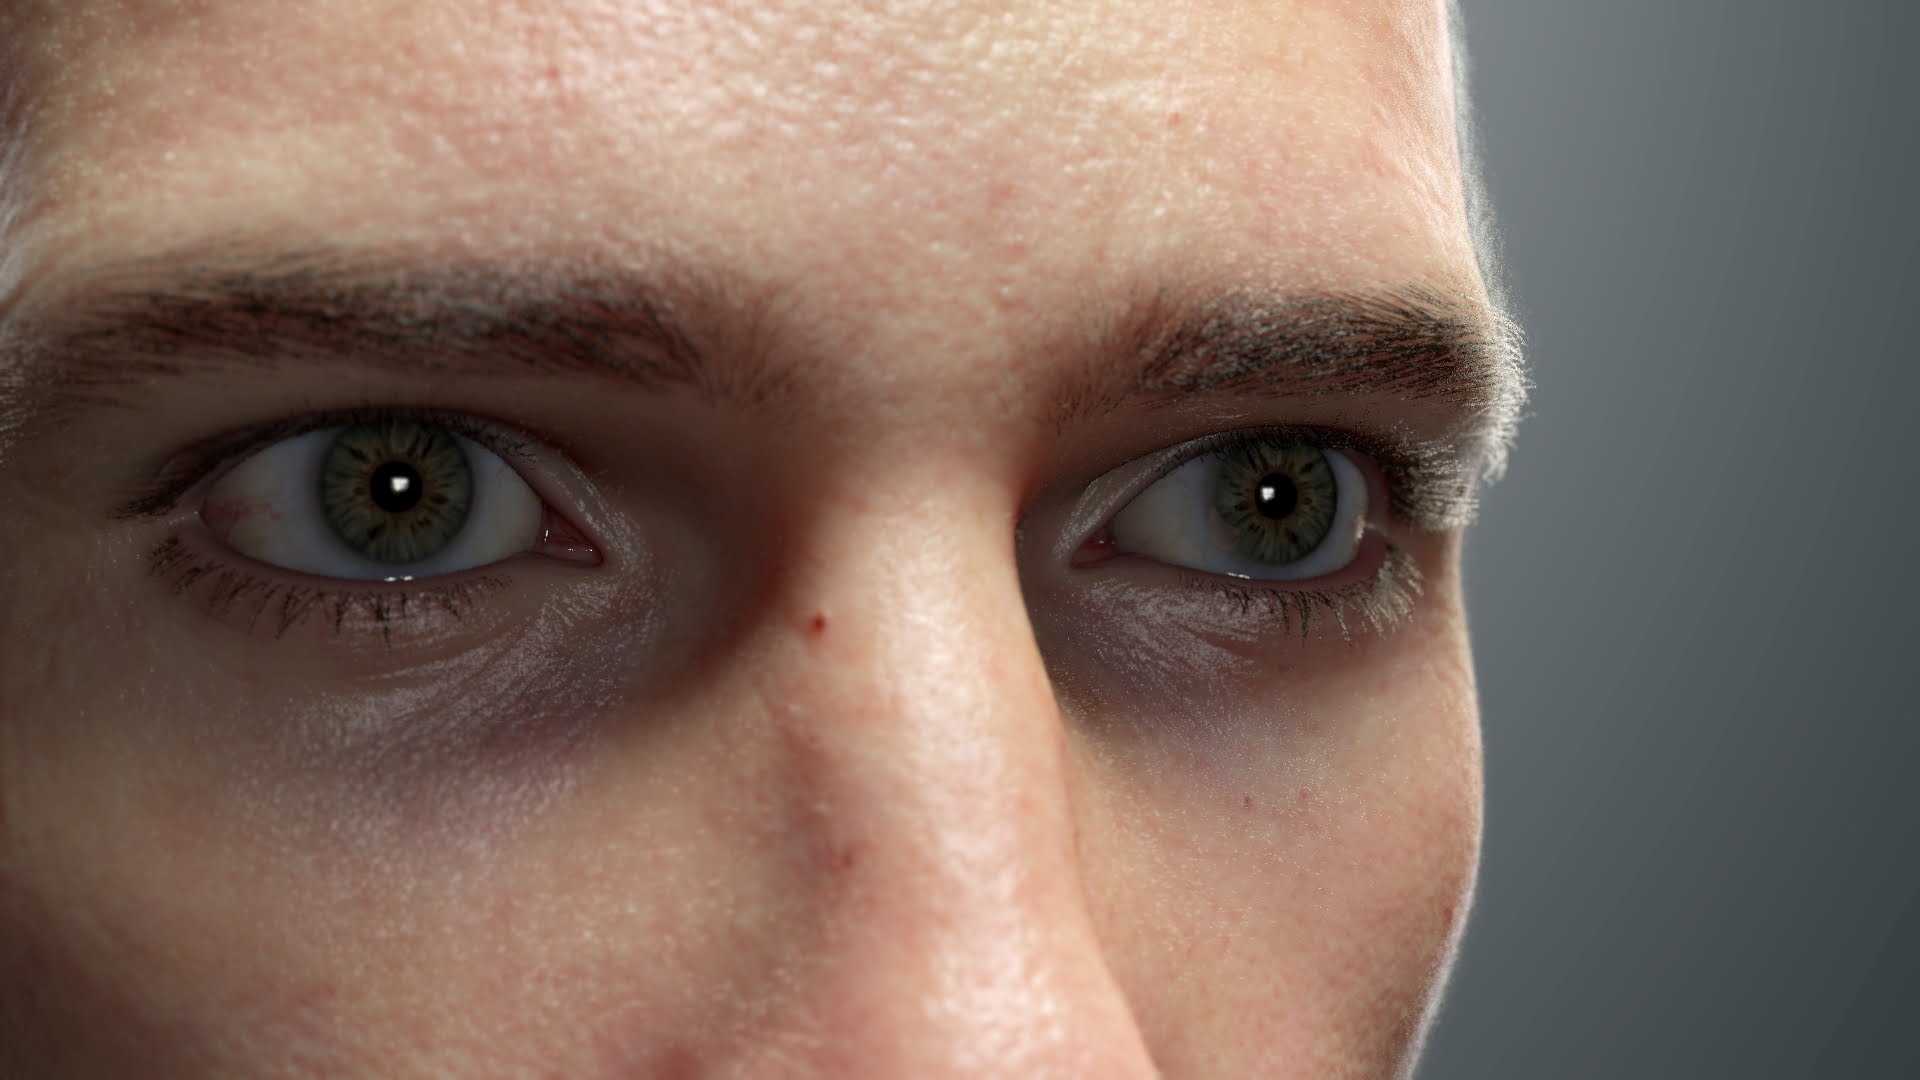 ED – The Realistic Human 3D Creation